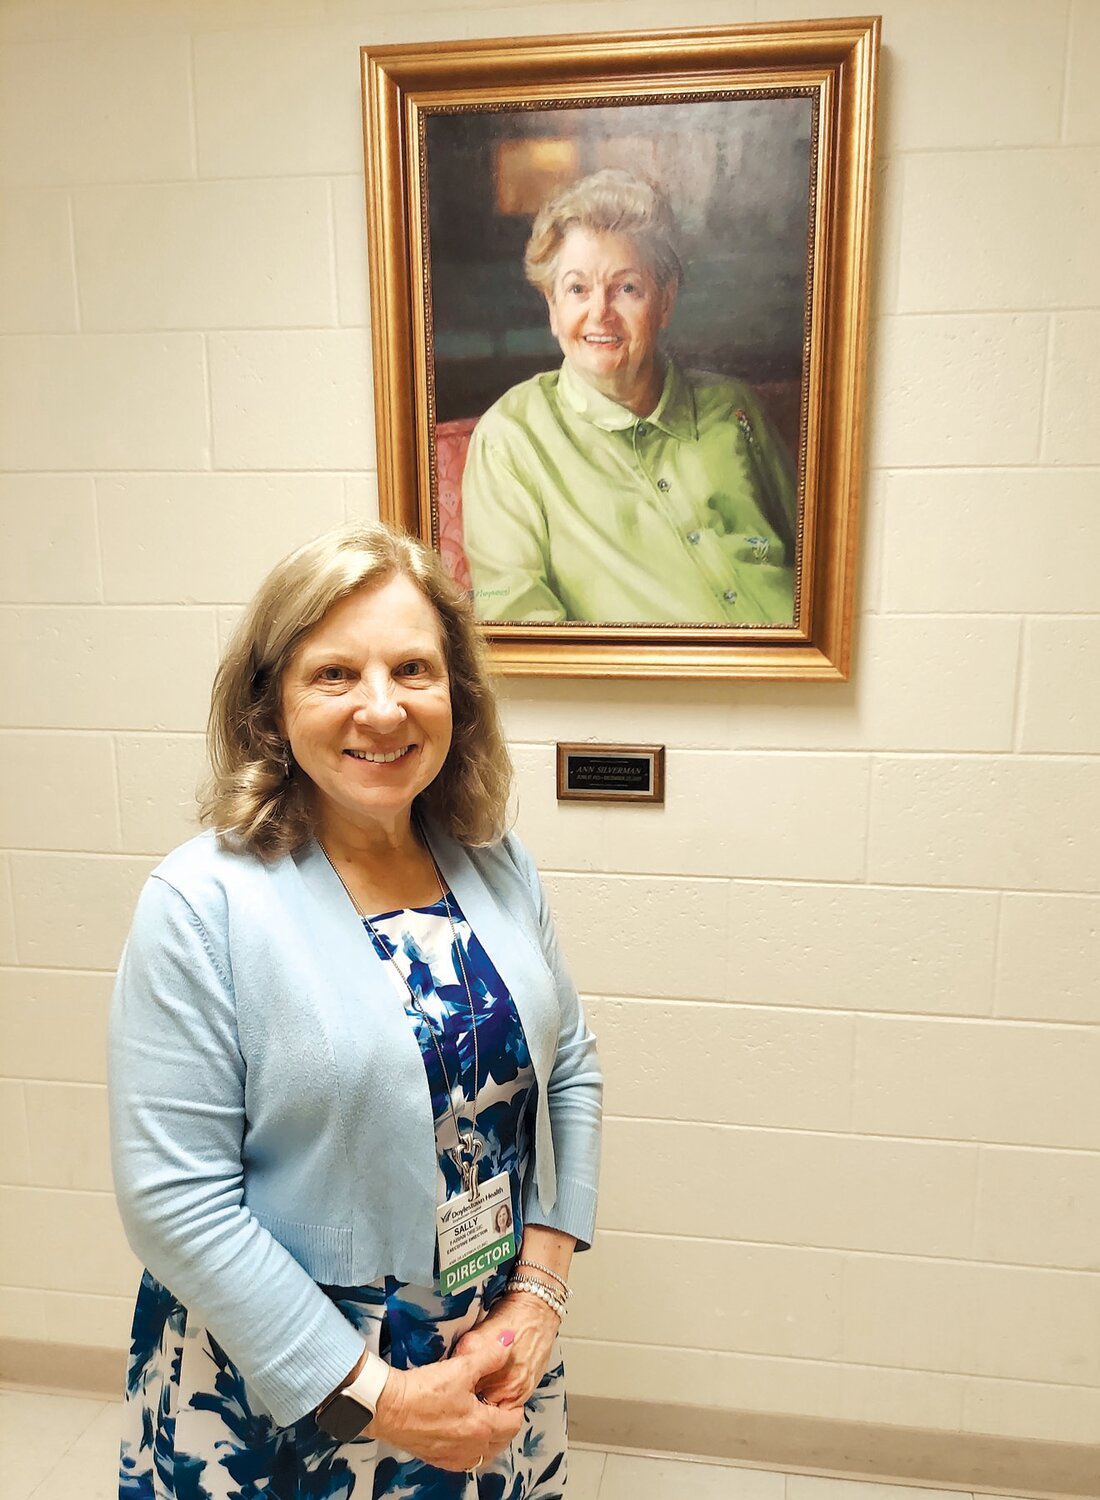 Sally Fabian Oresic stands by a portrait of Ann Silverman at the entrance to the Ann Silverman Clinic.